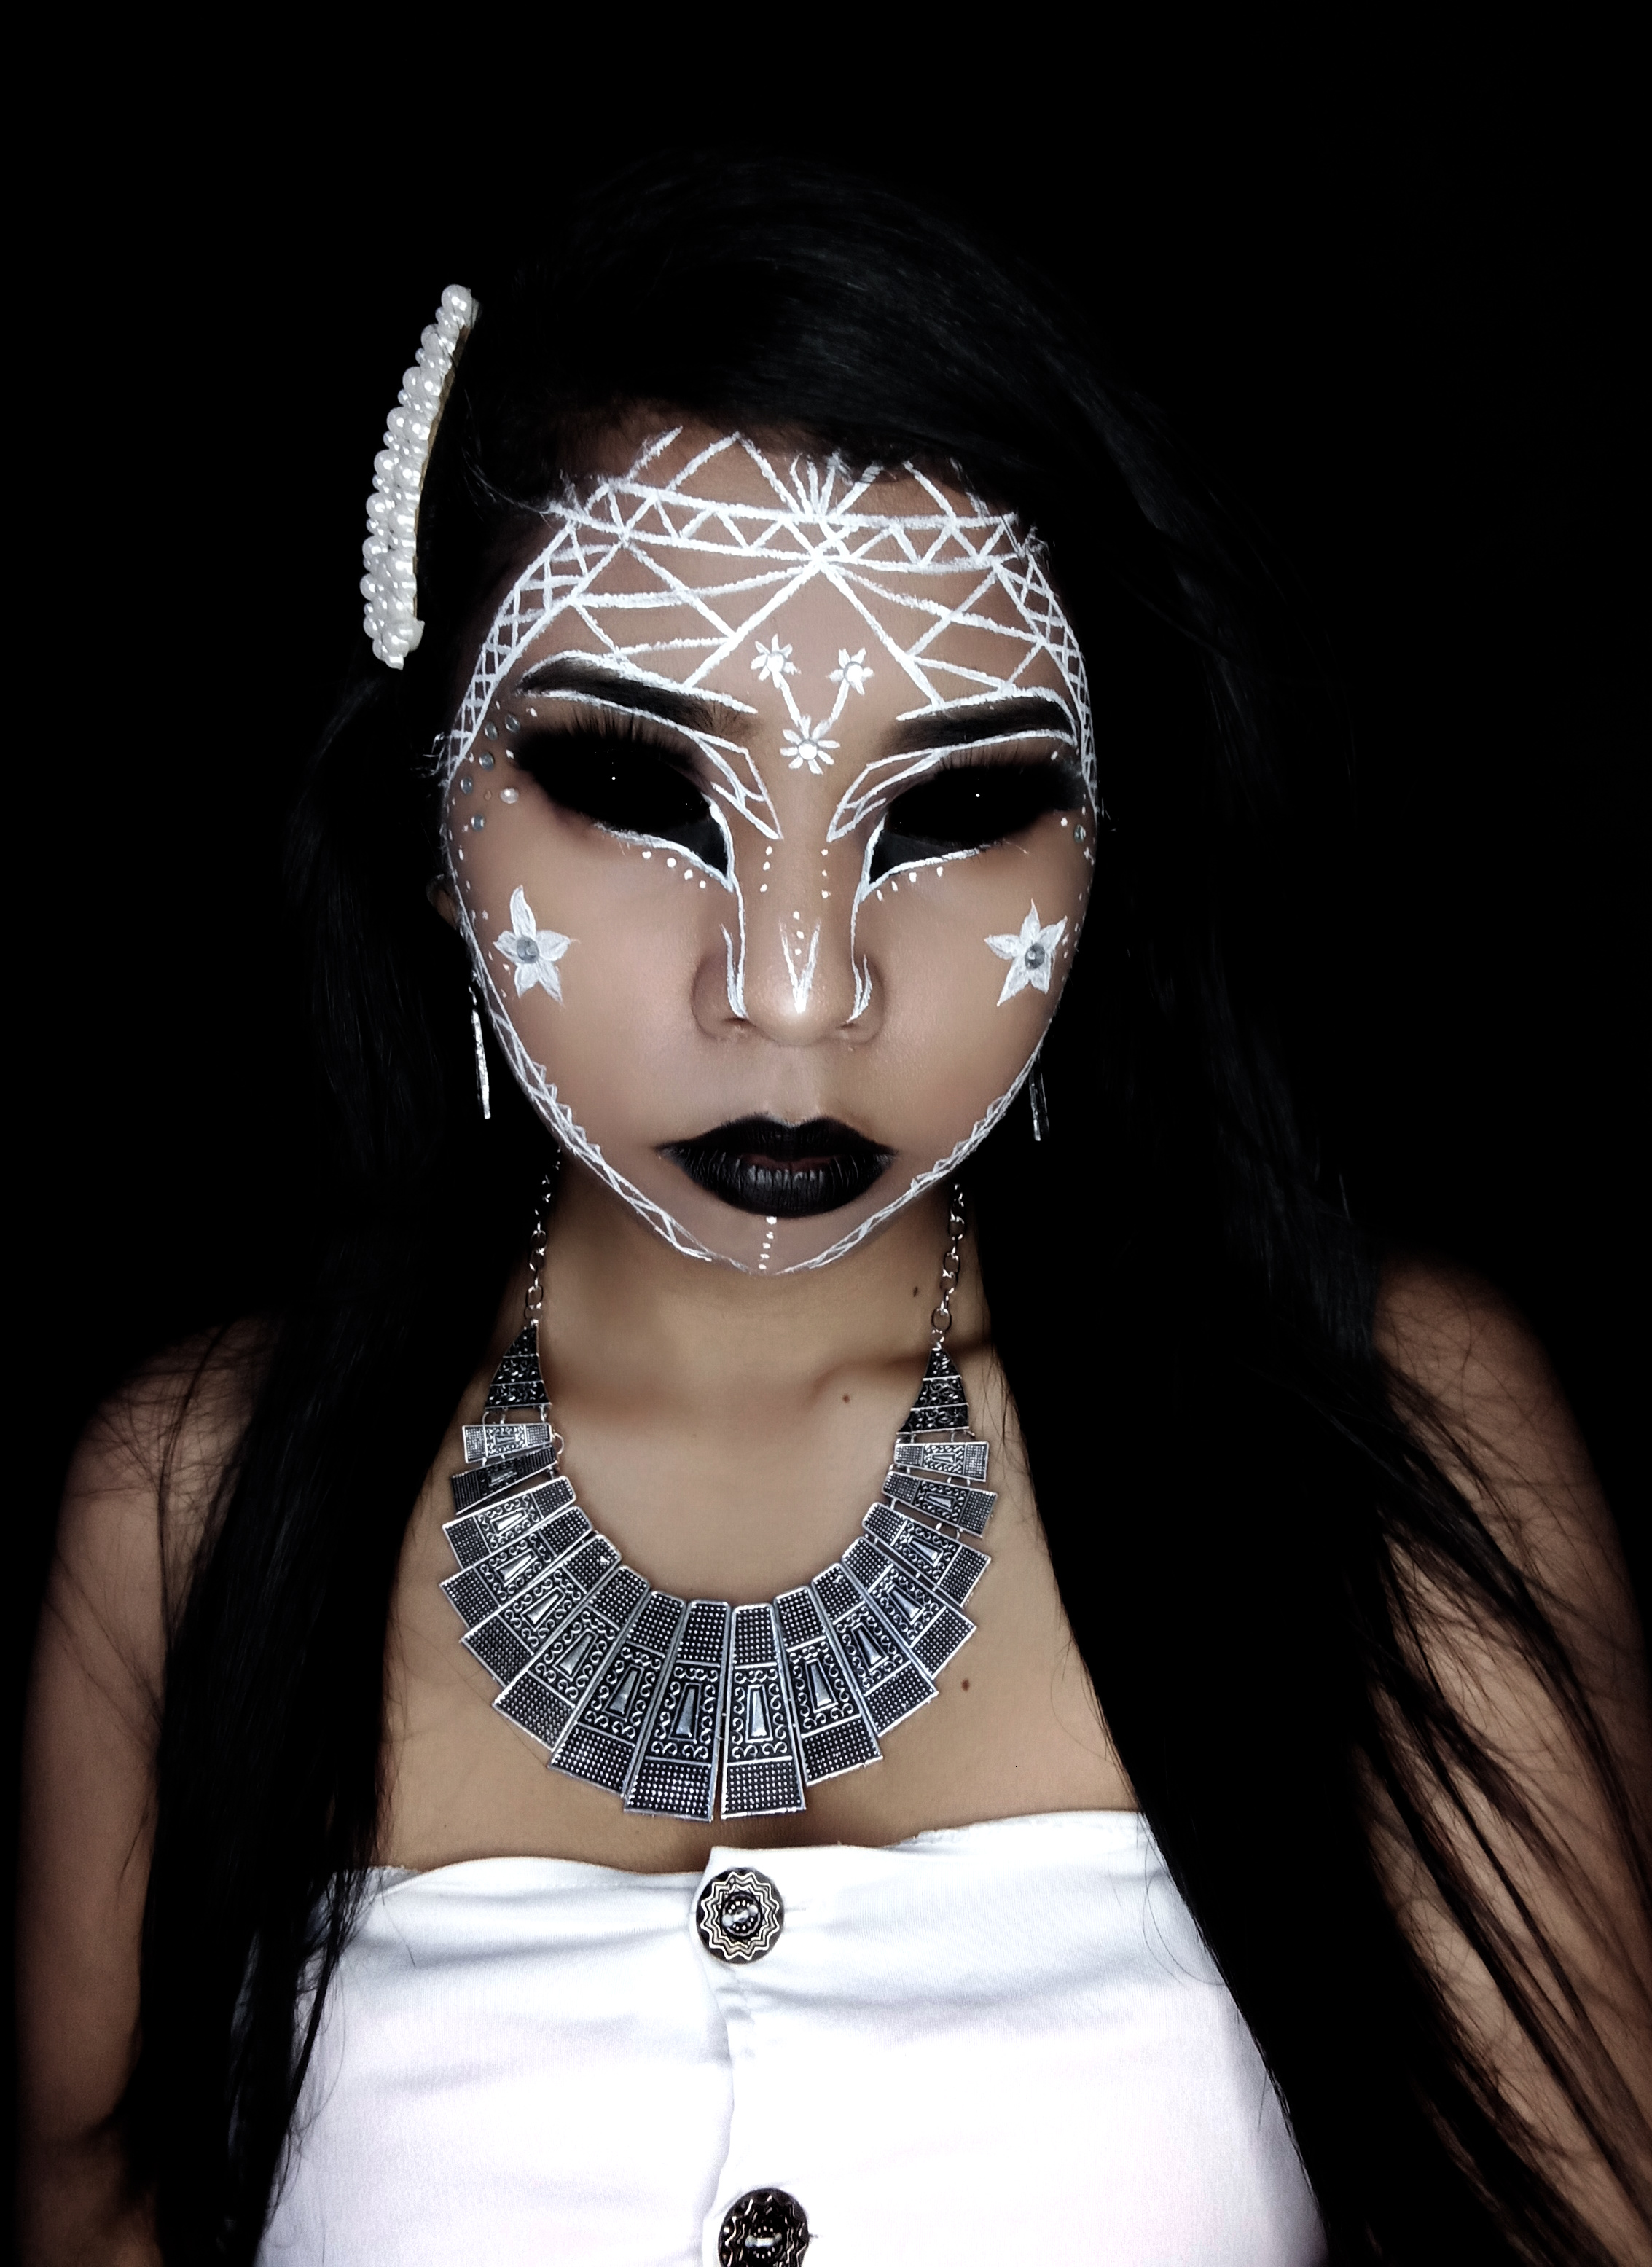 Artistic makeup inspired by spooky lace — Hive